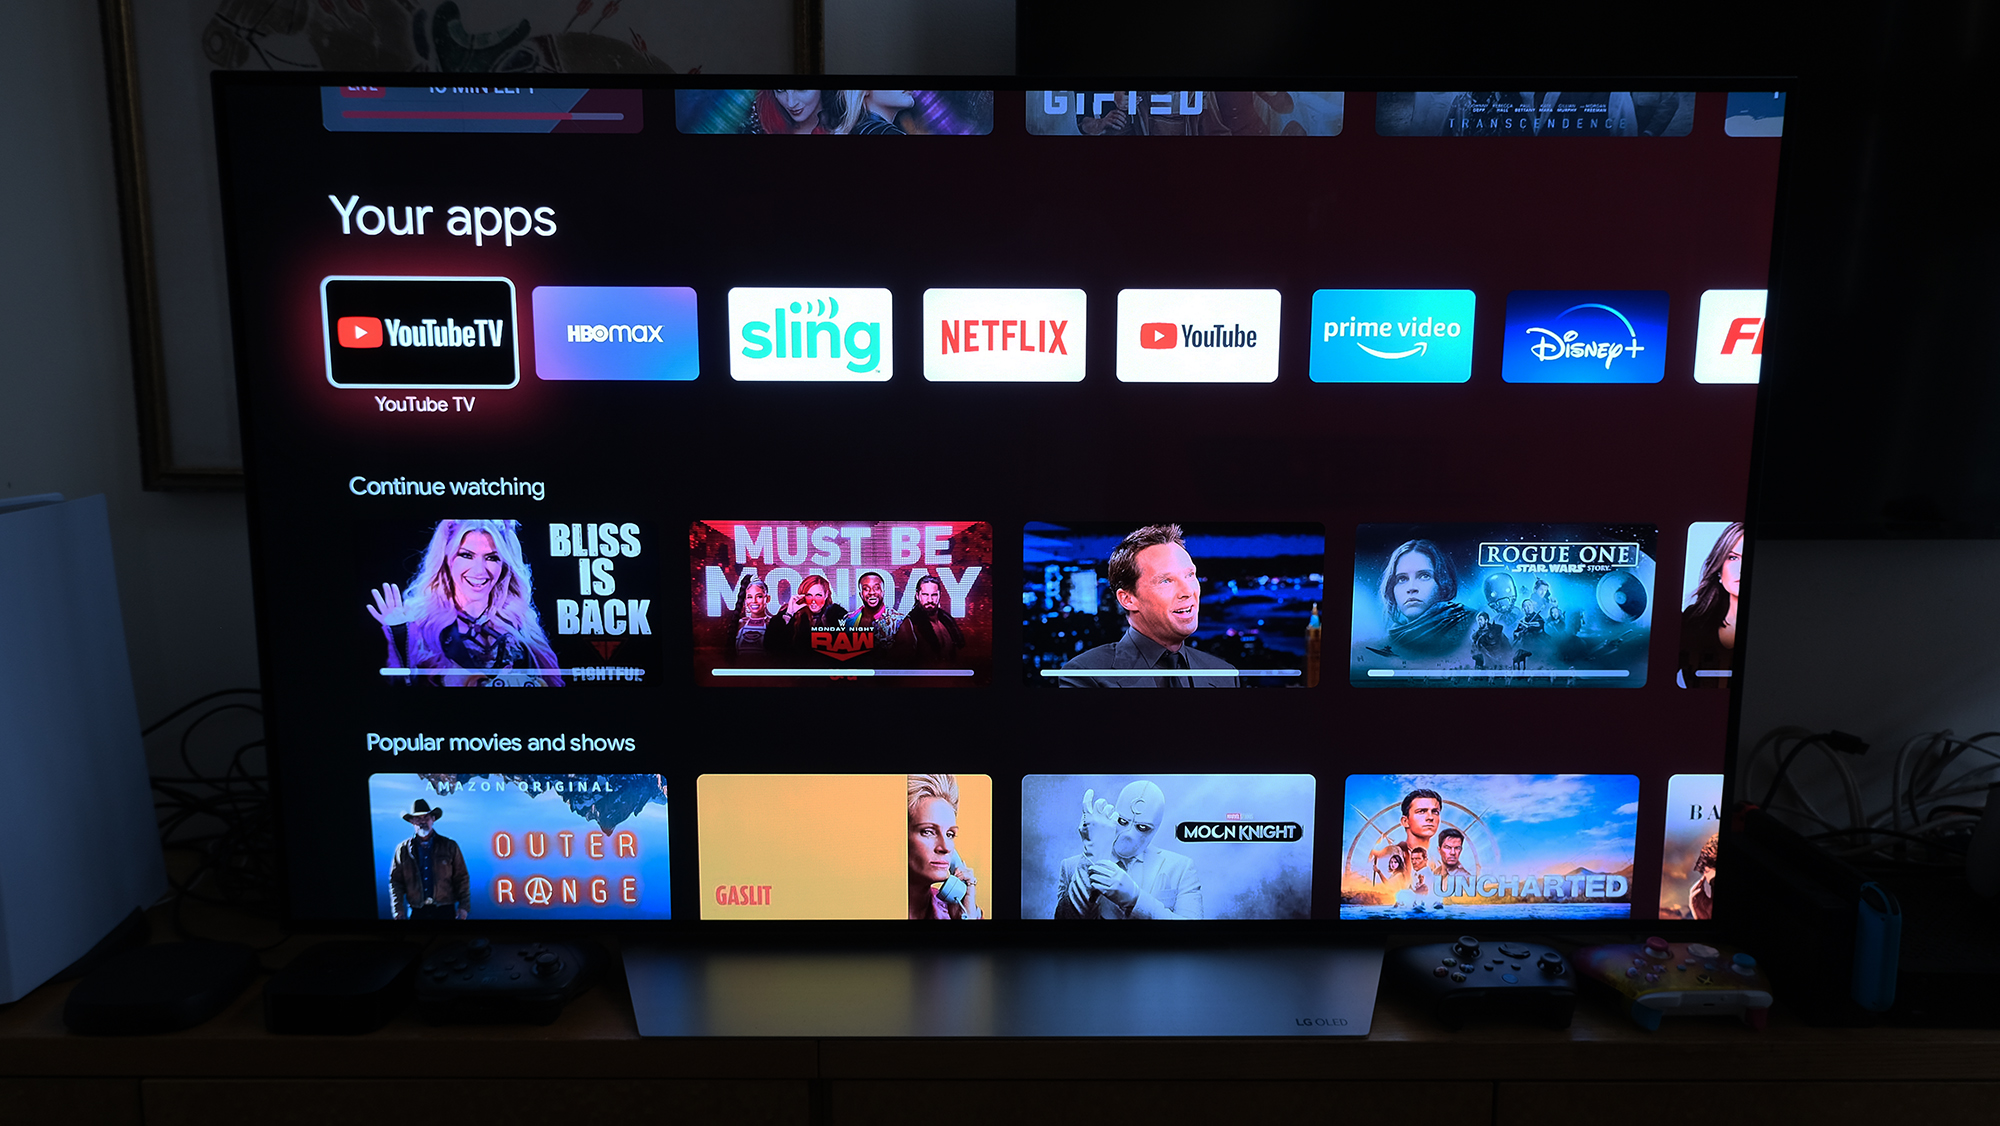 Apps and suggested content lines on the Chromecast with the Google TV home screen